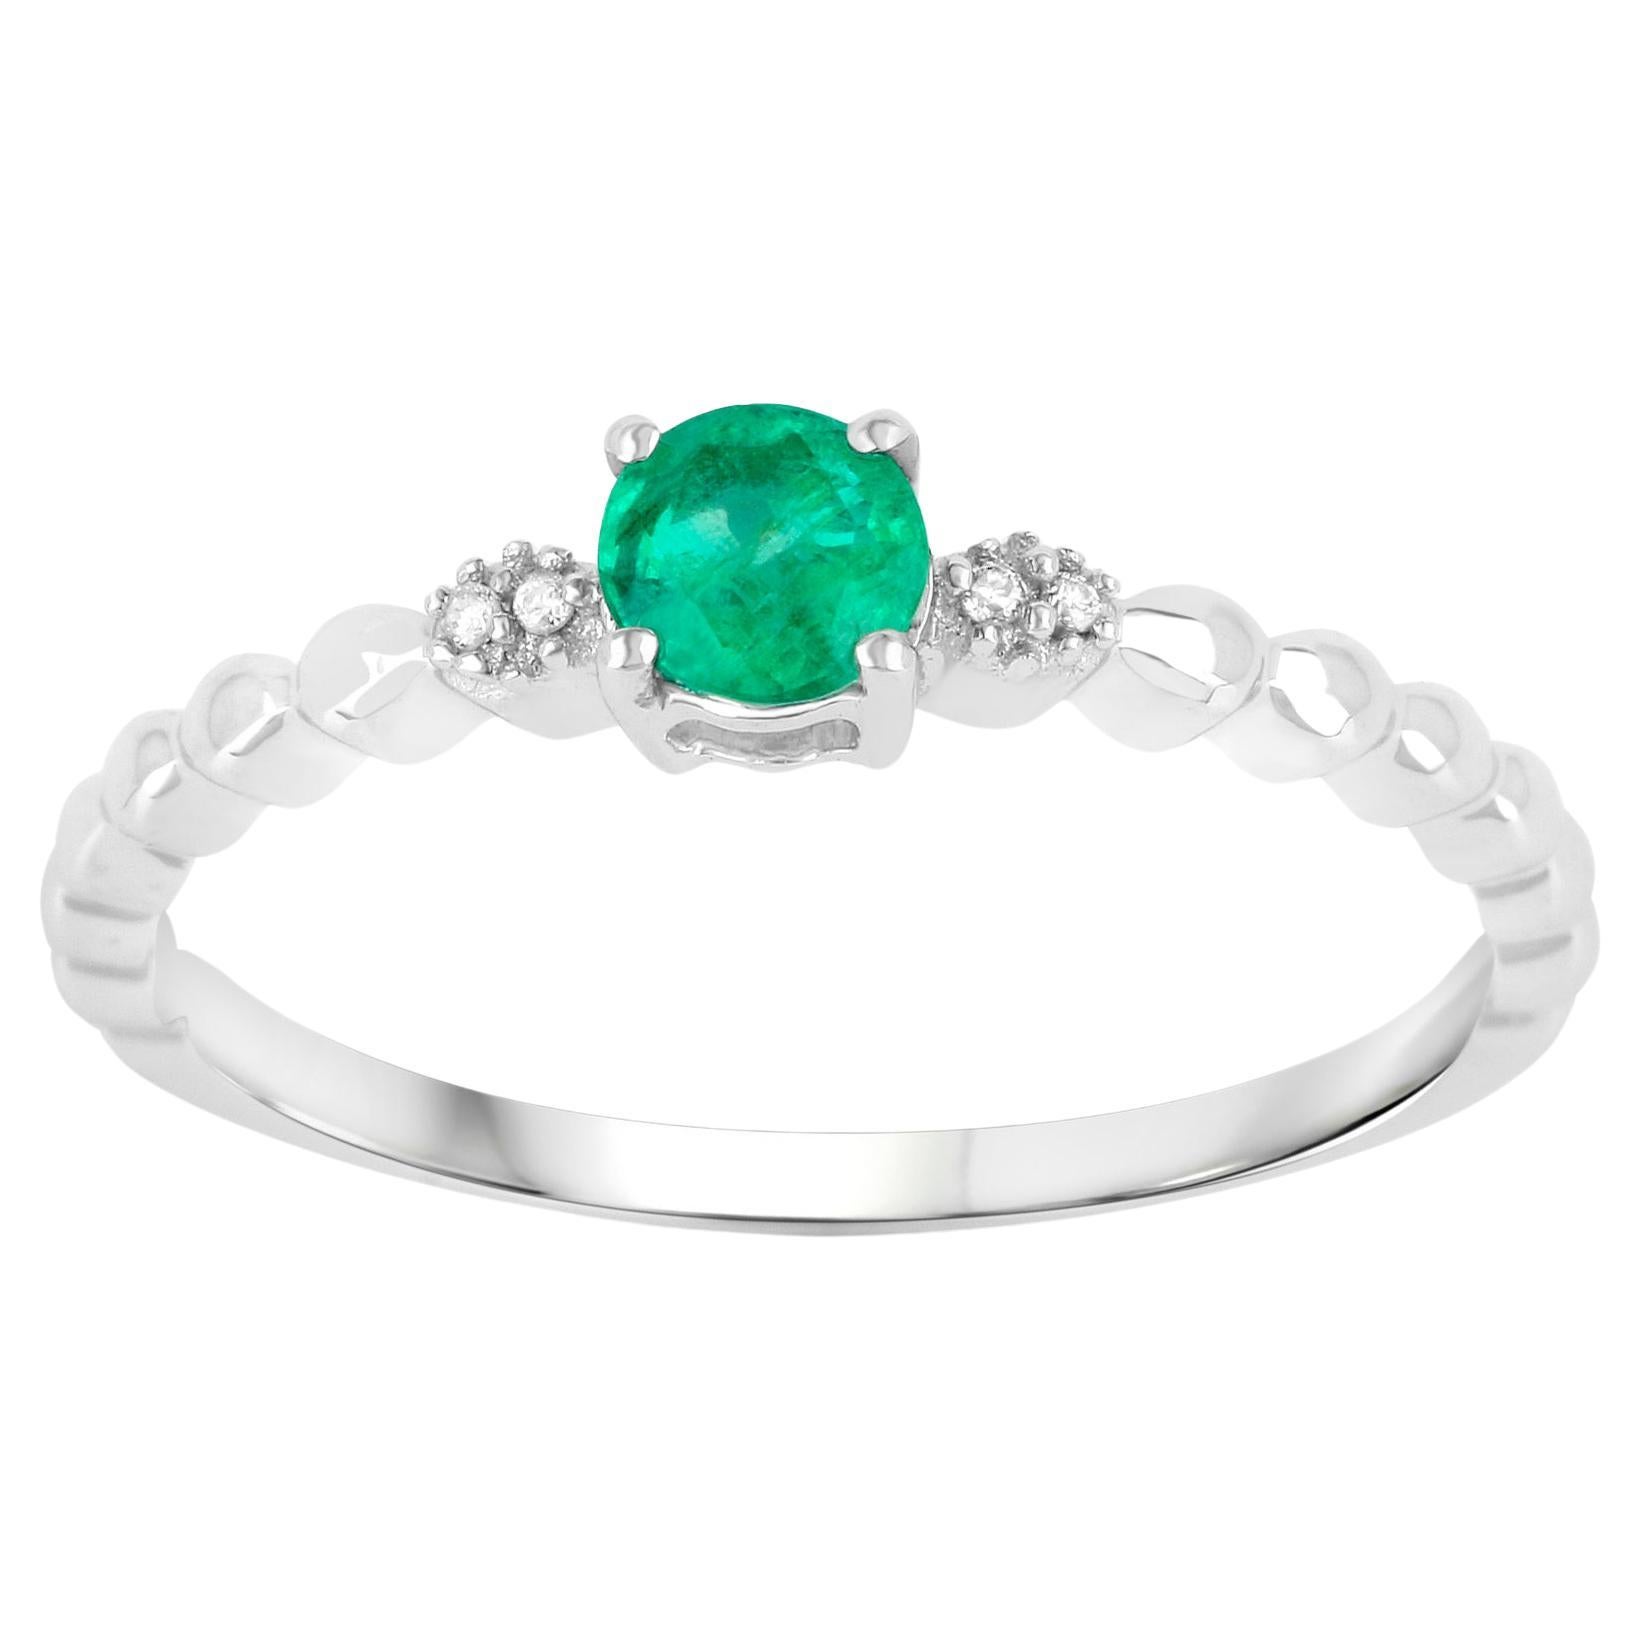 Natural Zambian Emerald Ring With Two Side Diamonds 0.31 Carats 14K White Gold